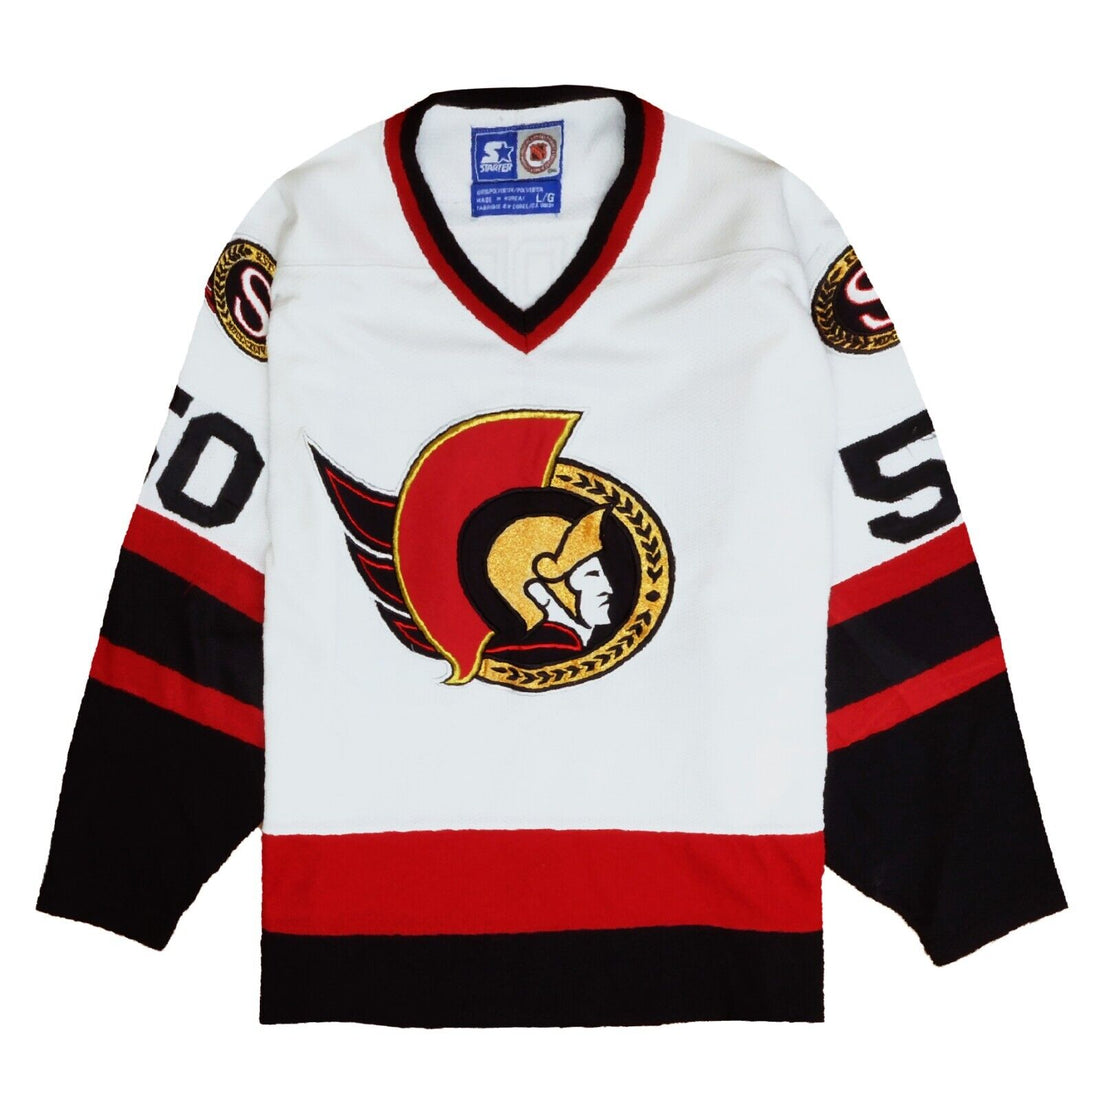 Ideal Place To Buy Phoenix Coyotes Jersey 90s by throwbackvault on